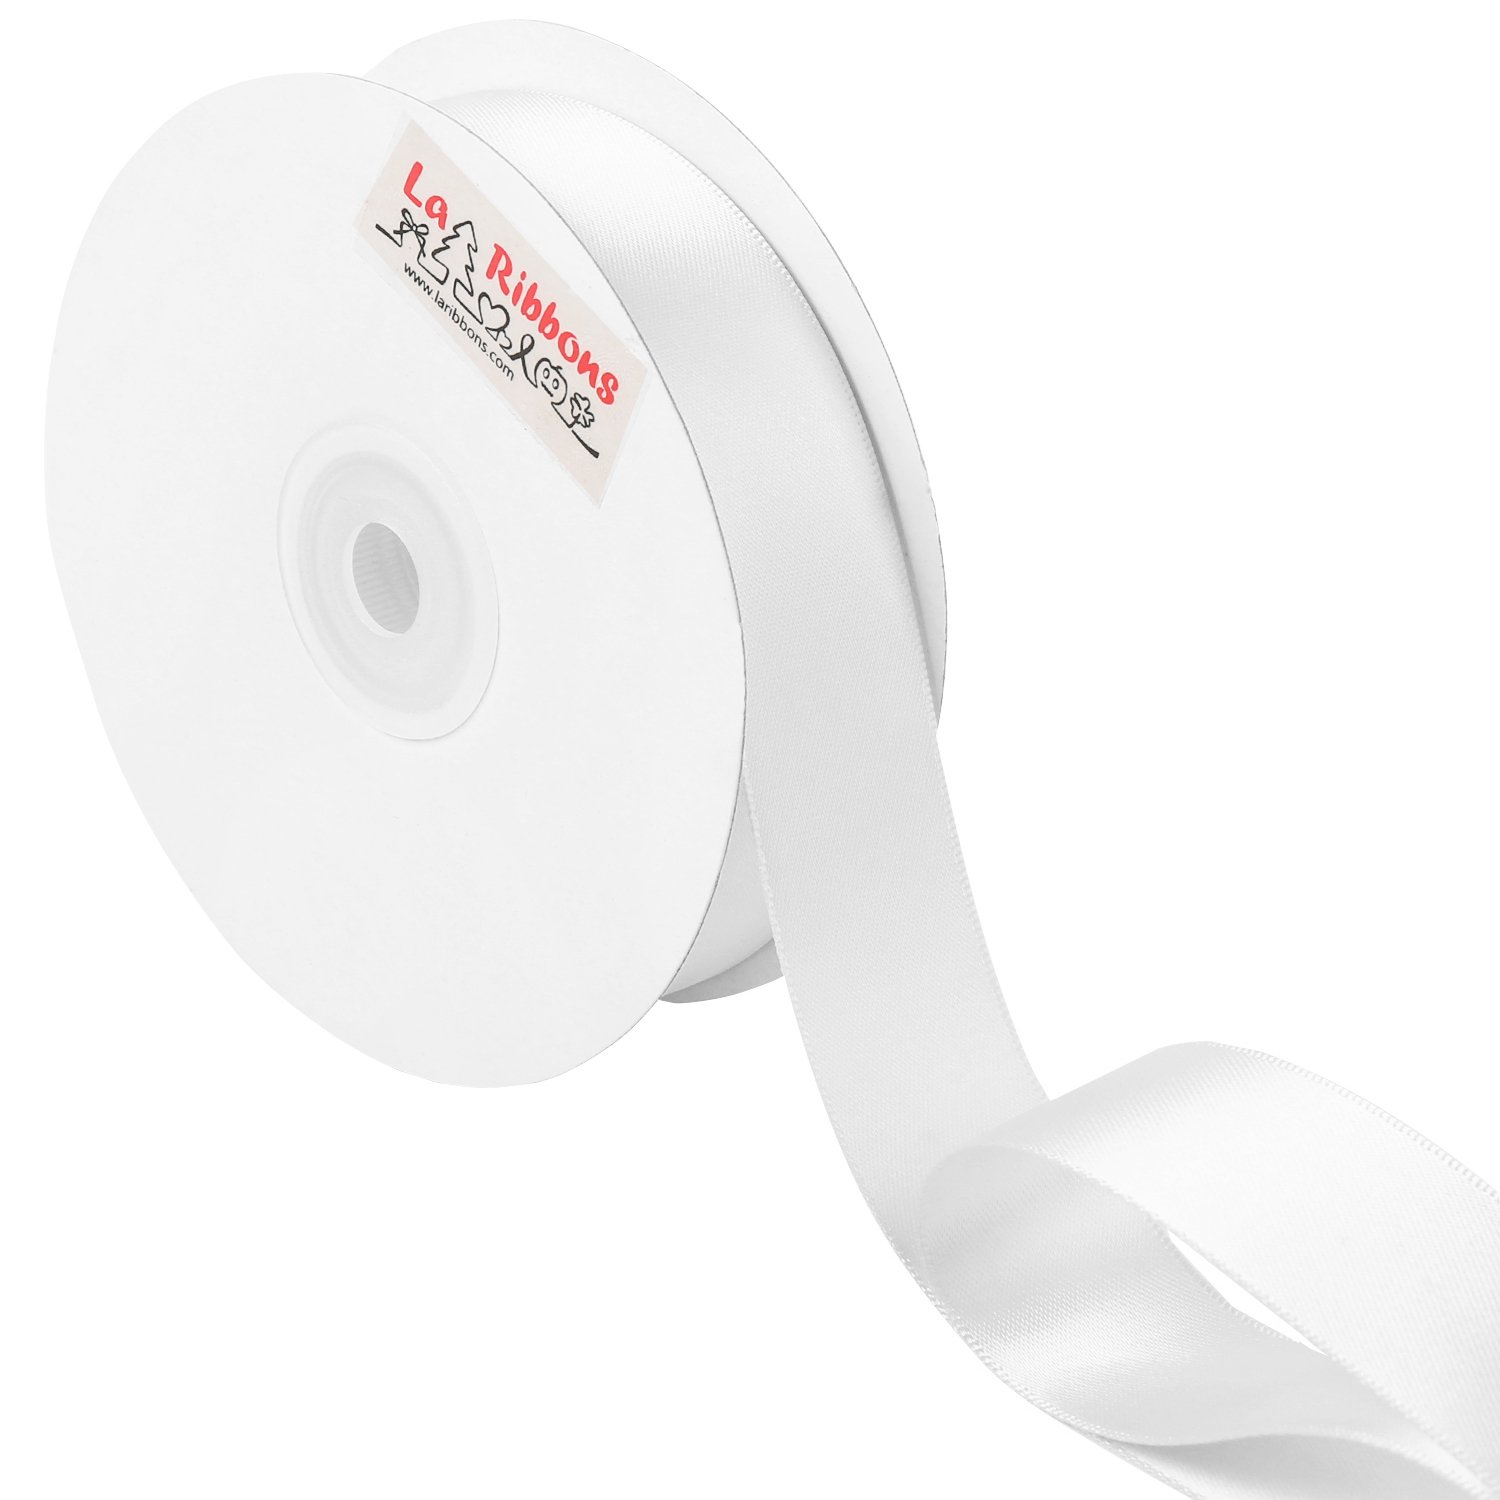 LaRibbons 1 Inch Wide Double Face Satin Ribbon - 25 Yard (029-White) 029- White 1 inch x 25 Yards